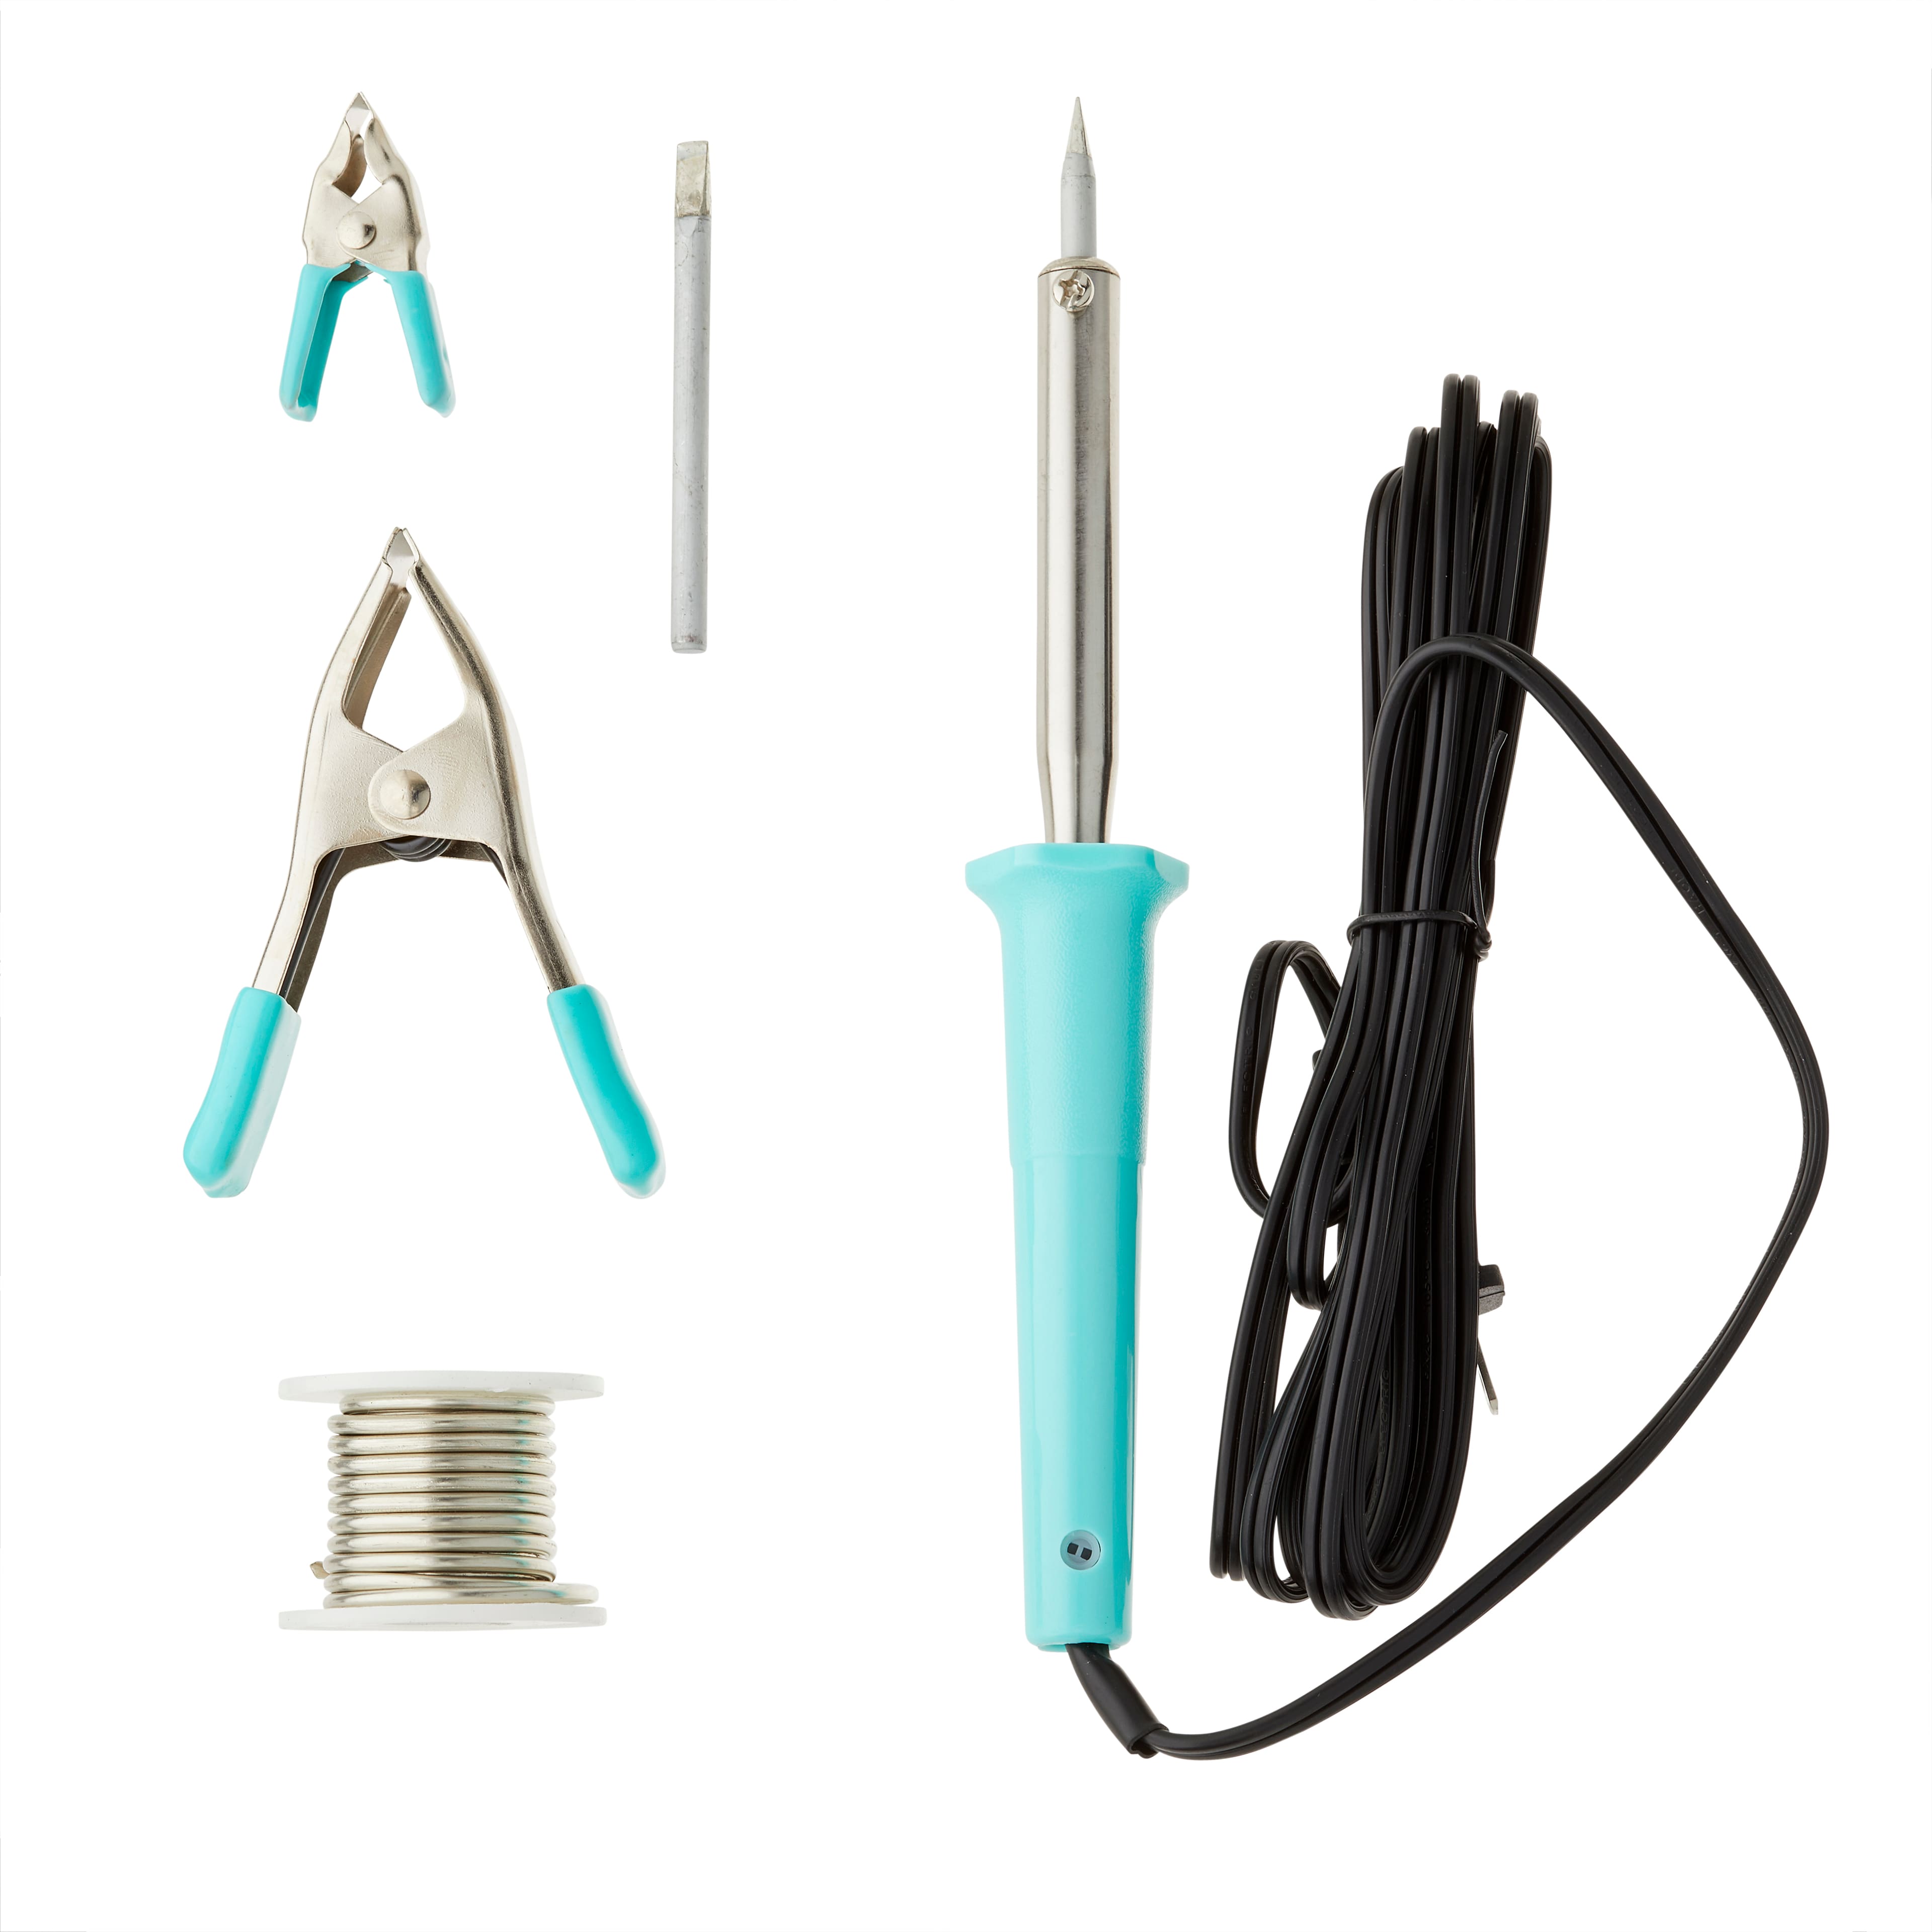 Dishfunctional Designs: How To Choose A Soldering Iron For Jewelry